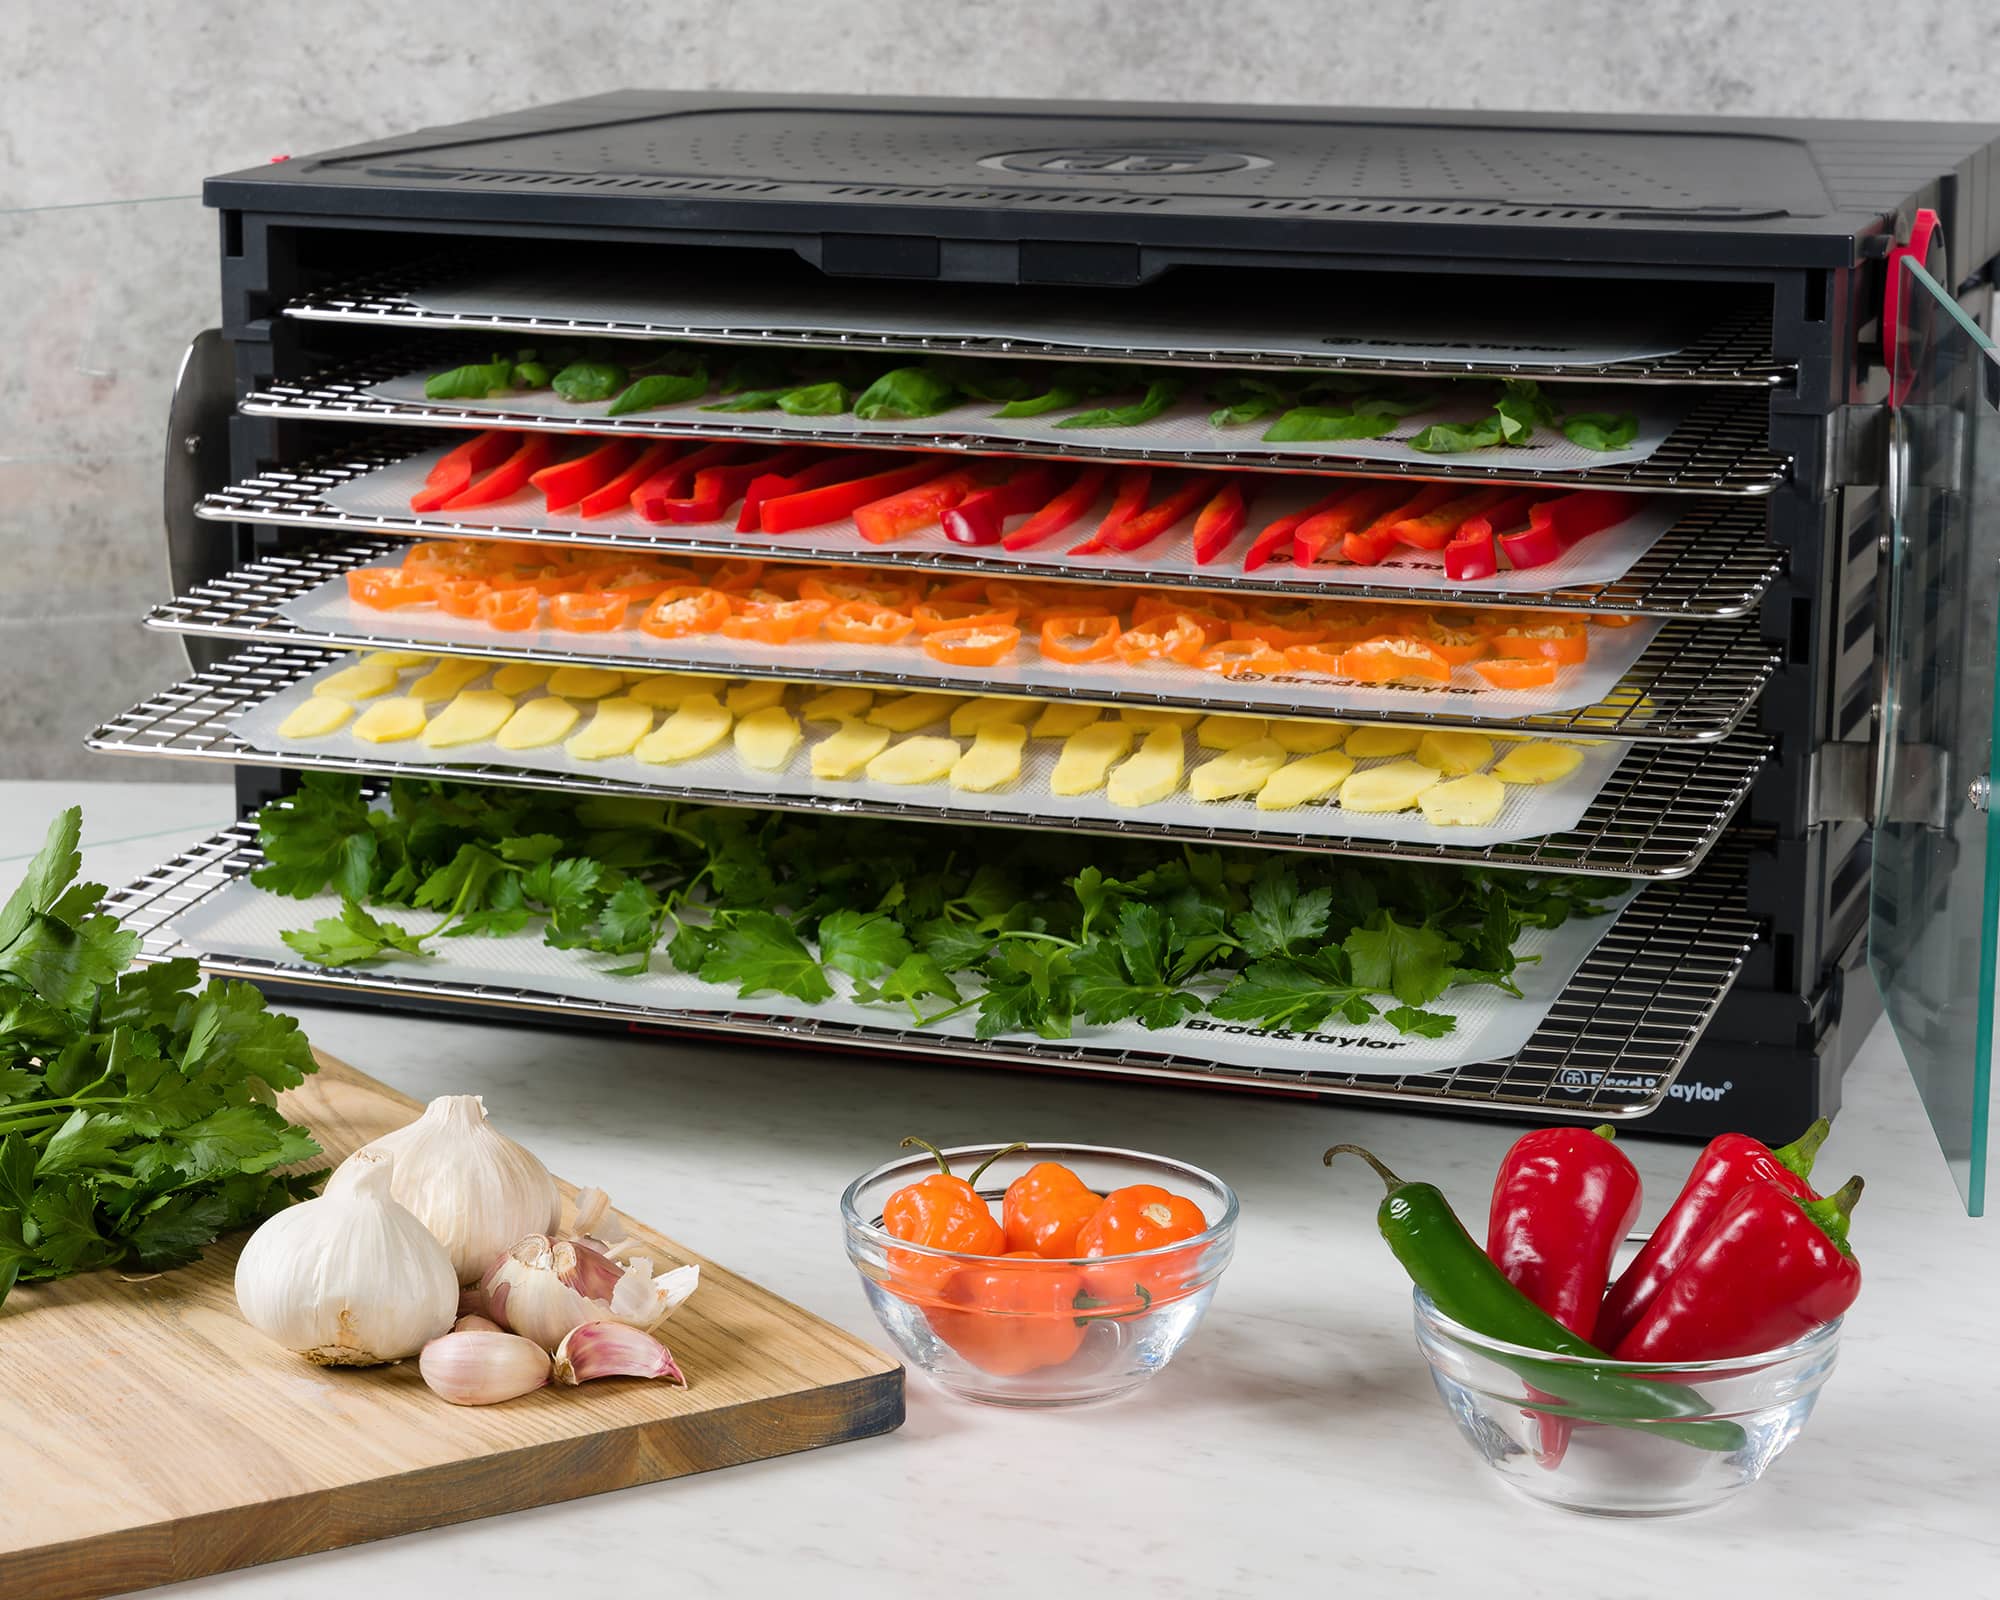 Brod & Taylor Silicone mats also used as drying mats for the Sahara folding dehydrator